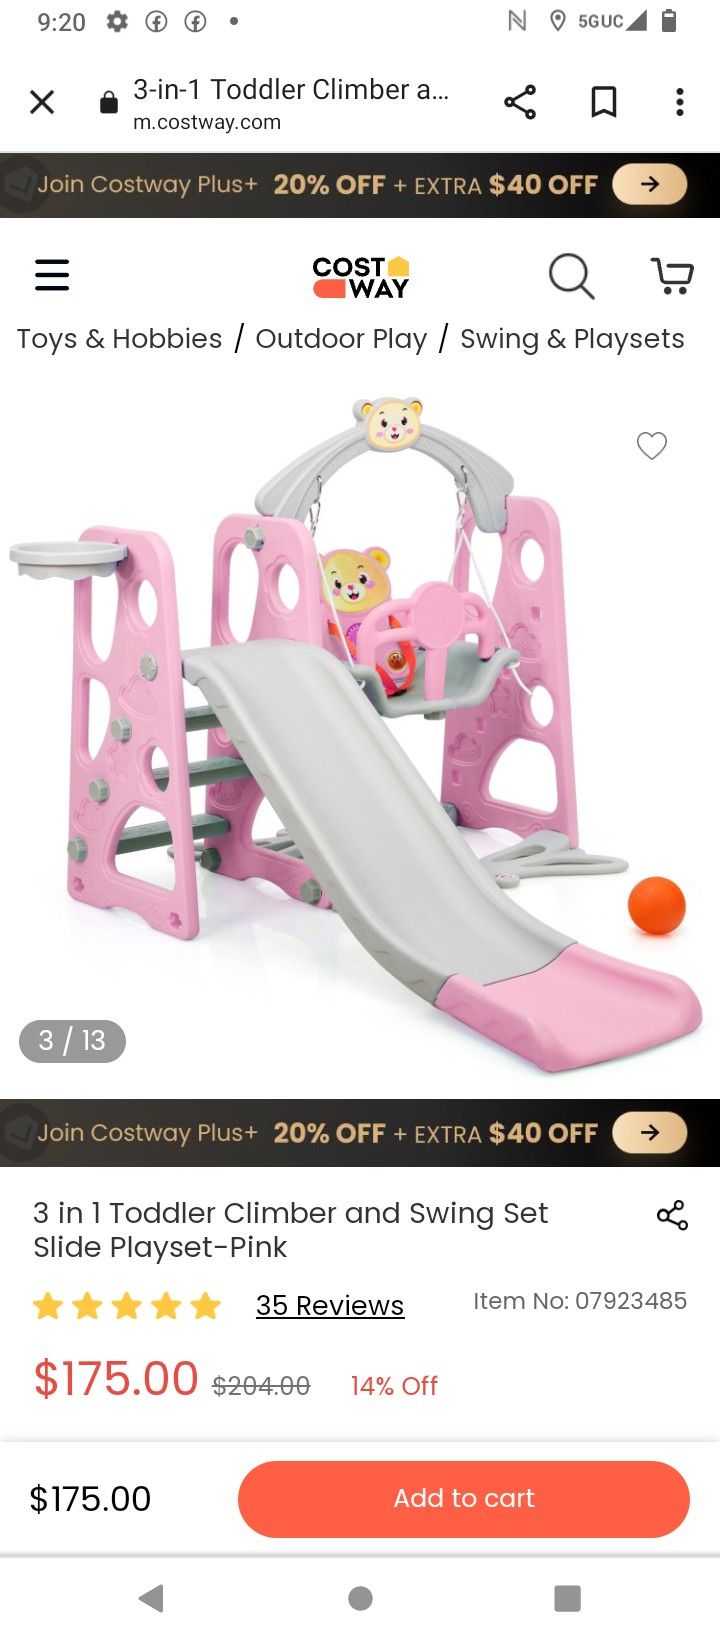 Climber And Swing Set $120